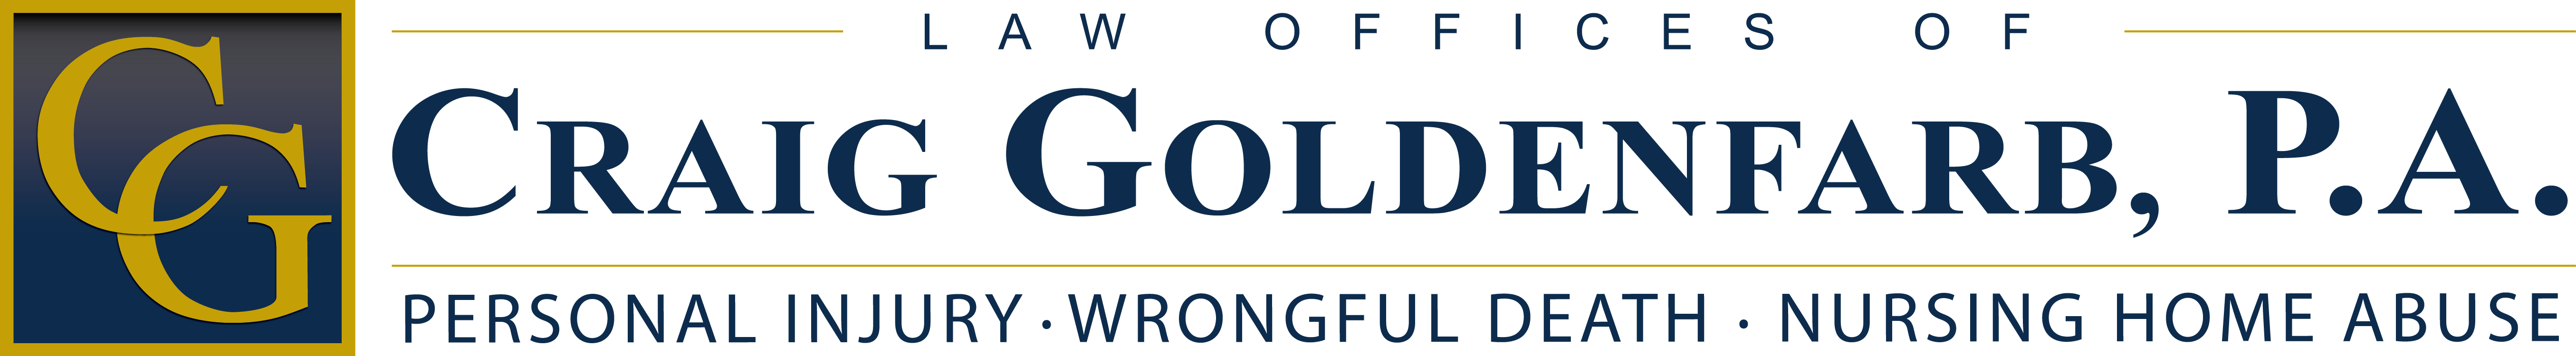 Law Offices of Craig Goldenfarb, P.A. Company Logo